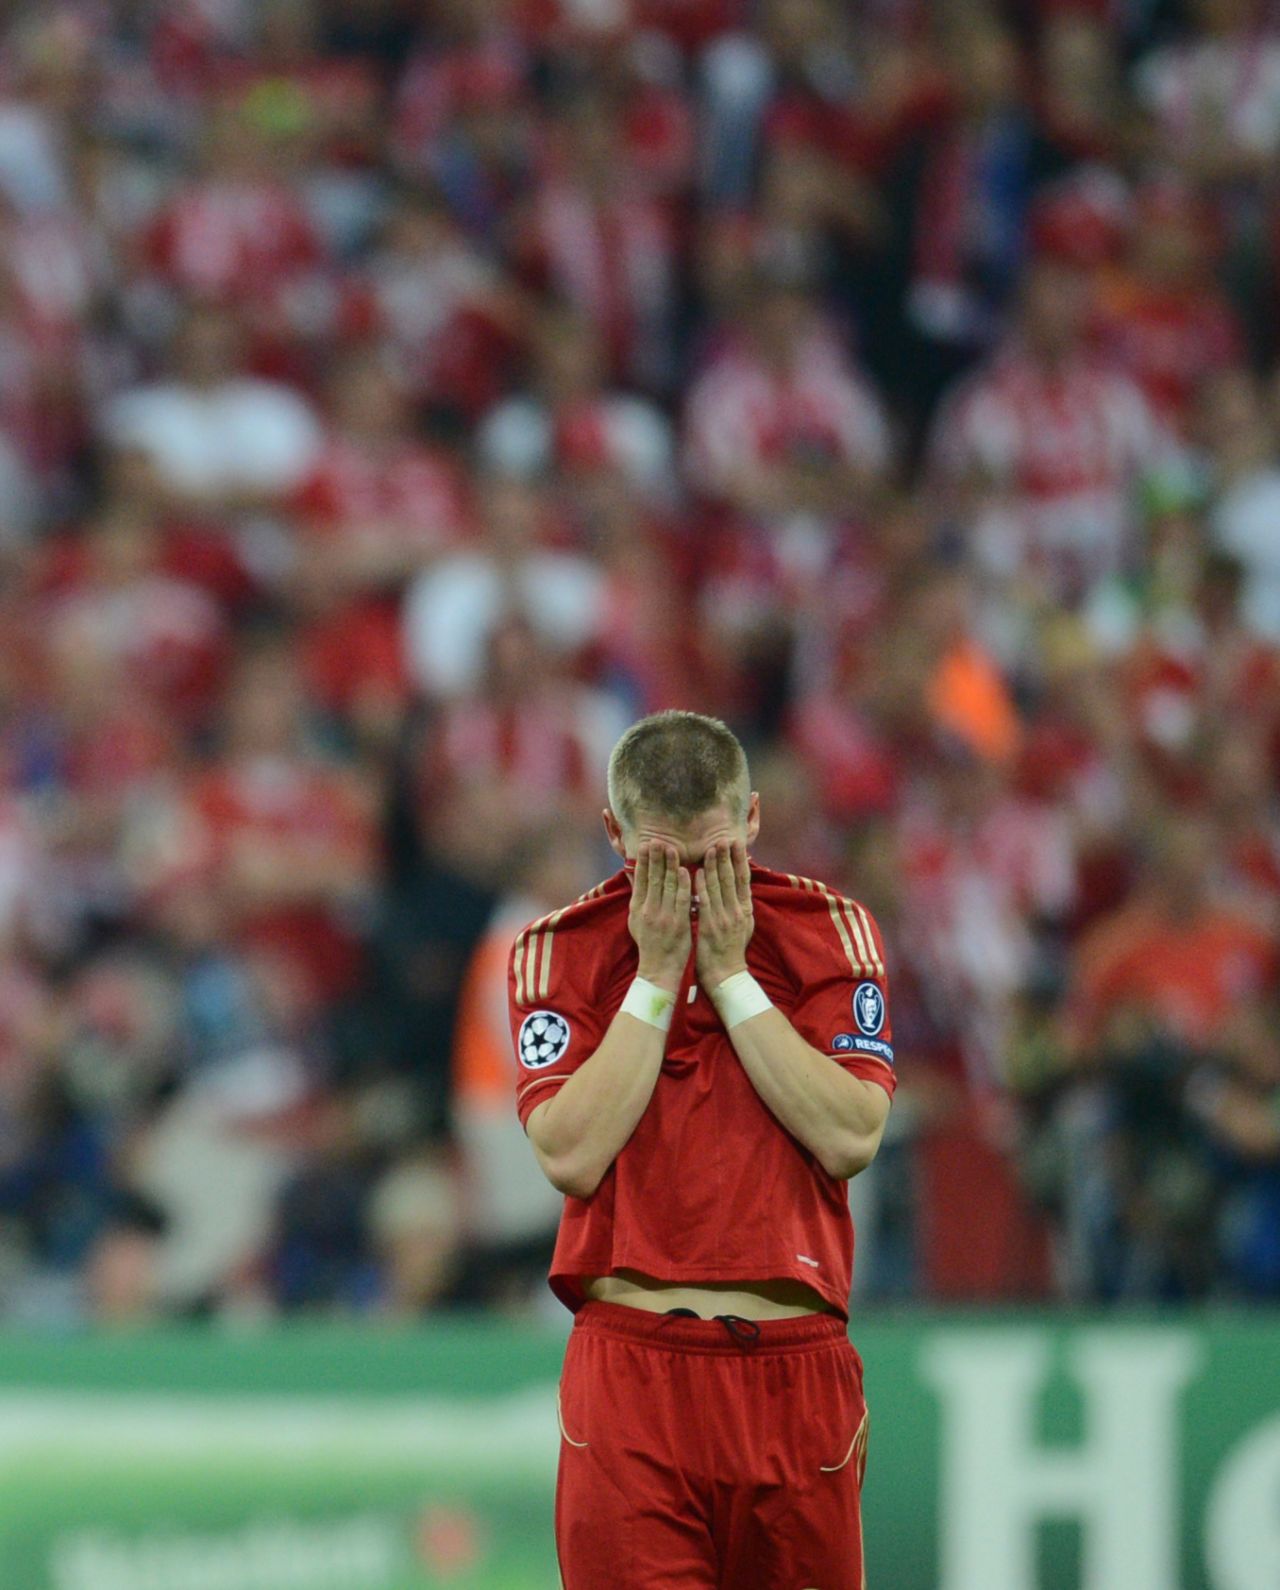 Bayern Munich's players and fans were distraught after losing Saturday's European Champions League to Chelsea, but the German team's brand was second on the list, valued at $786 million.